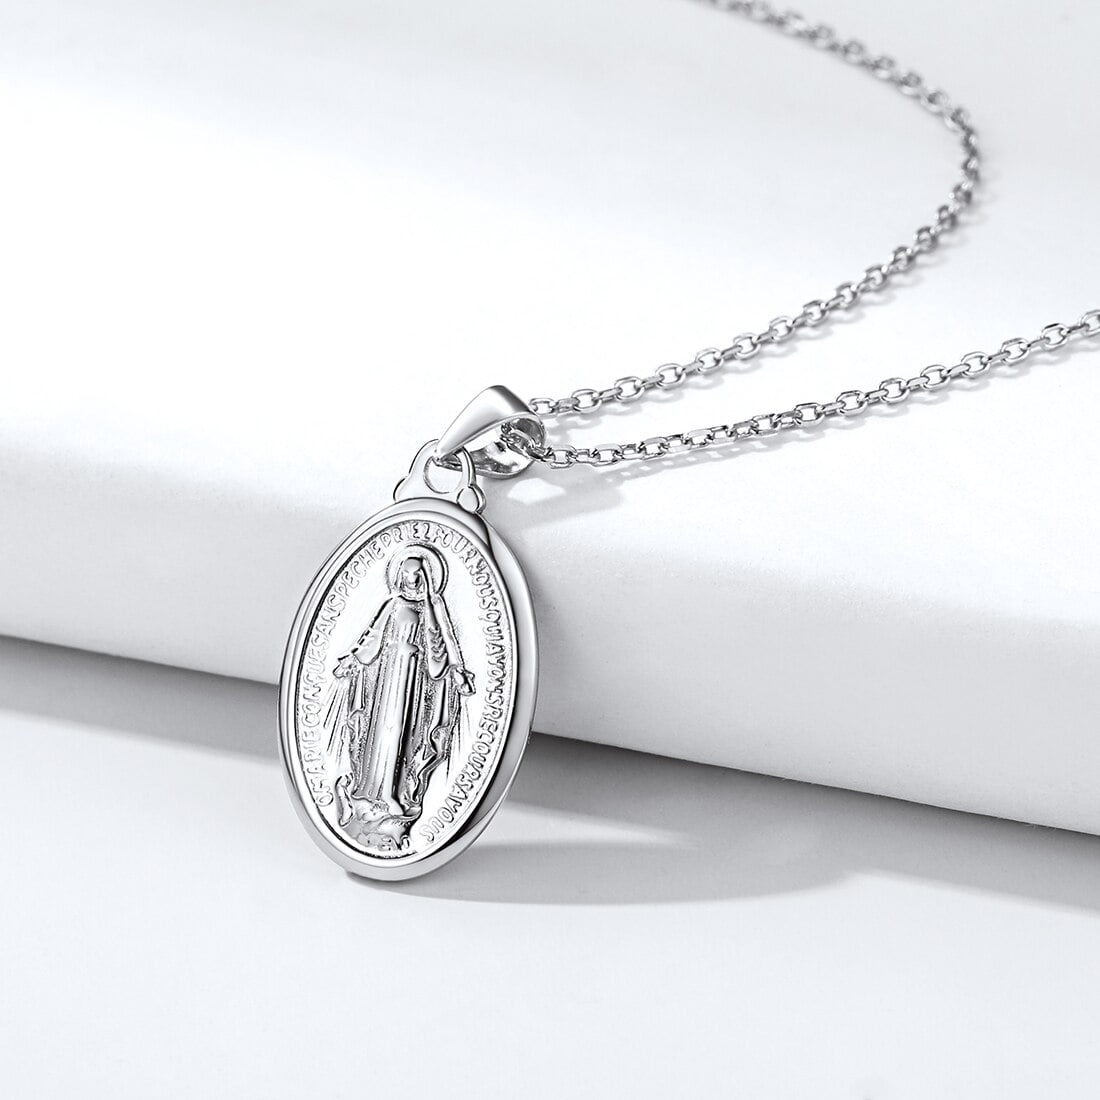 ChicSilver Virgin Mary Necklace 925 Sterling Silver Miraculous Medal Oval  Pendant Catholic Religious Christian Jewelry